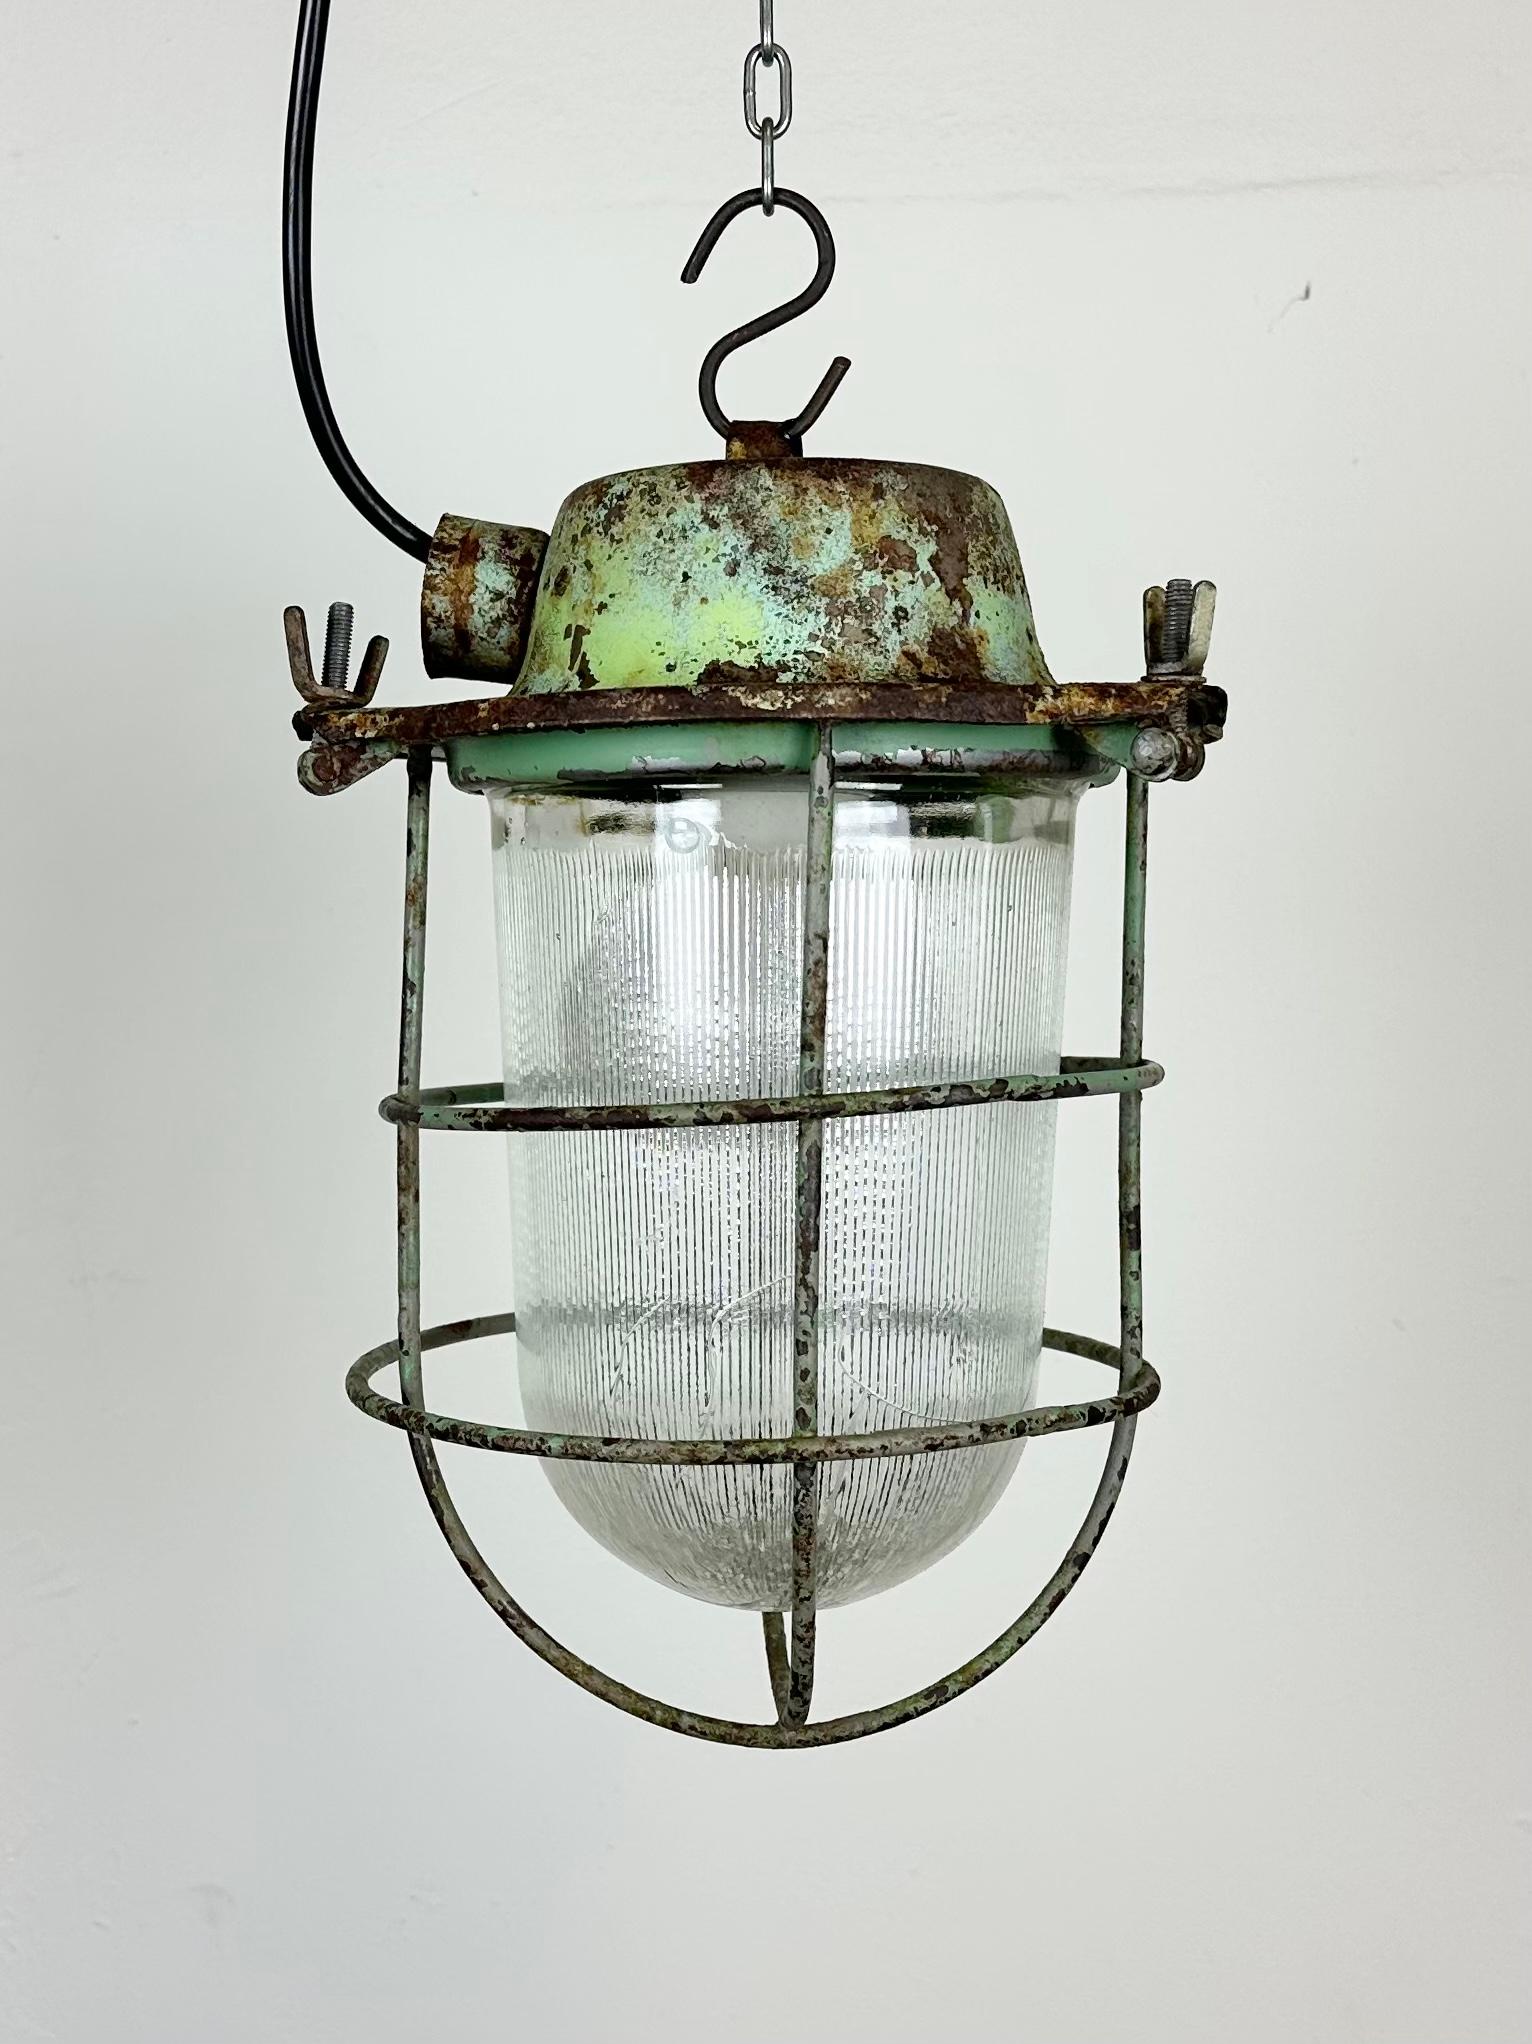 Glass Green Industrial Soviet Bunker Pendant Light with Iron Grid, 1960s For Sale